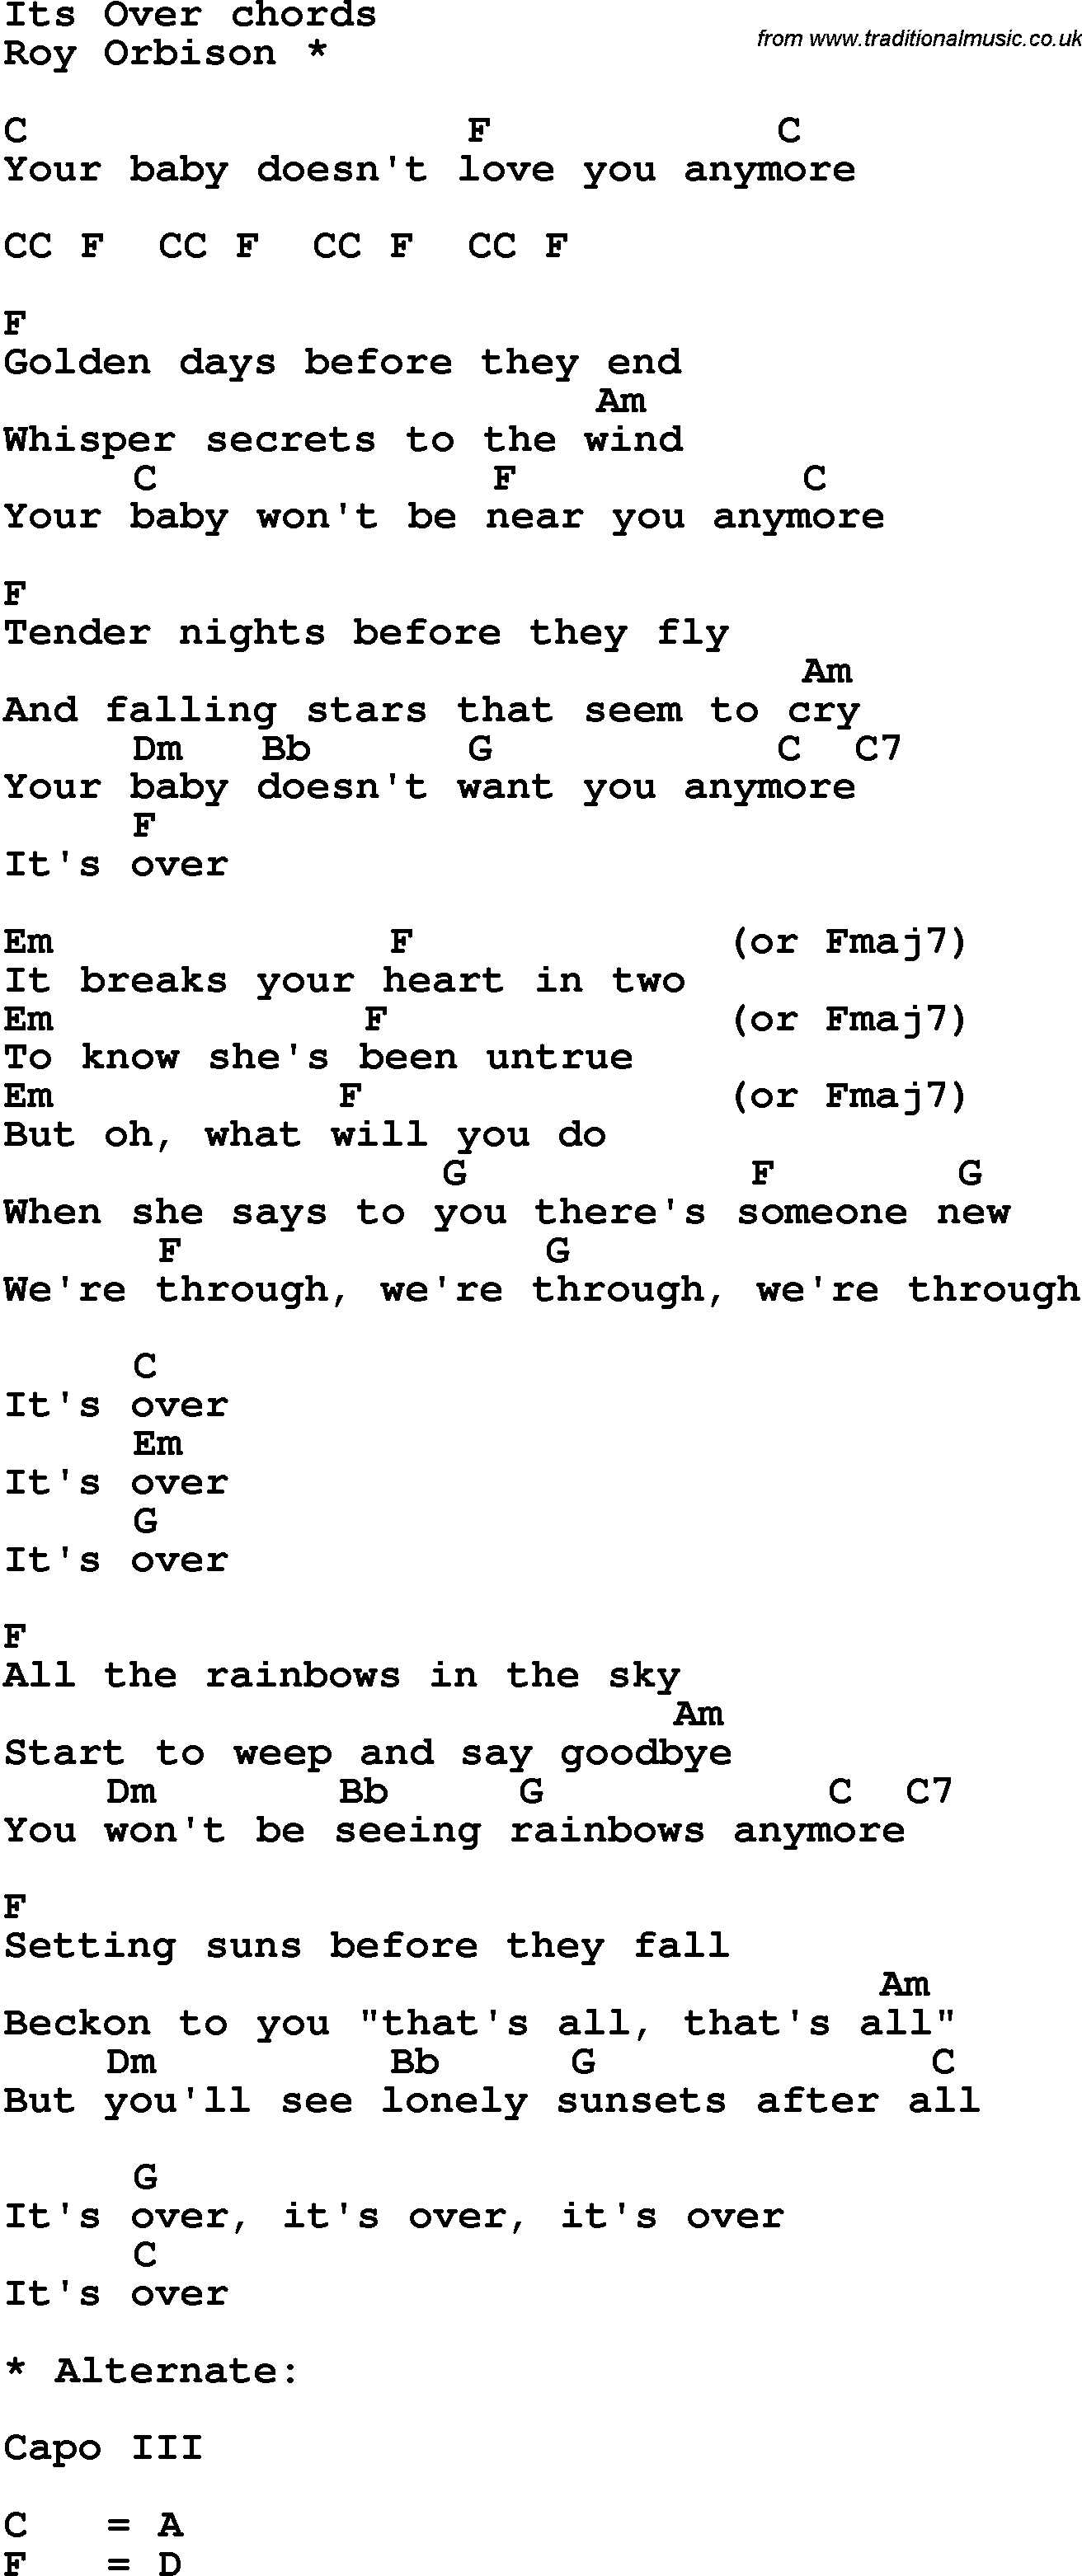 Song Lyrics with guitar chords for It's Over